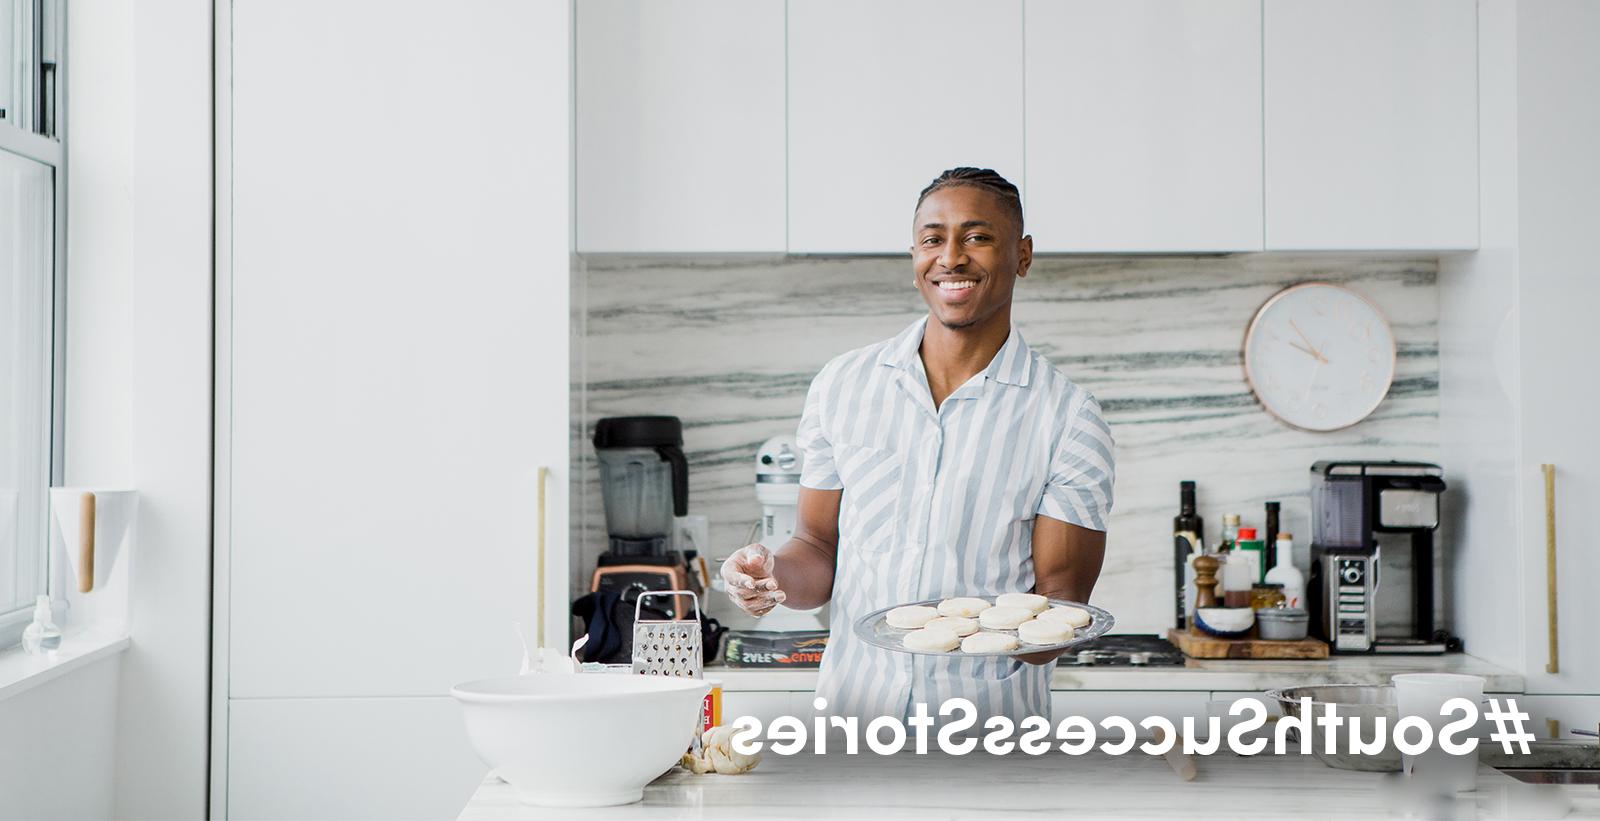 Devin Epps, a 2018 graduate of the Mitchell College of Business, works as a food stylist on contract with the Food Network and is in the process of building his own company. “I see myself as a storyteller, and hopefully that will translate into whatever I'm drawn to.”